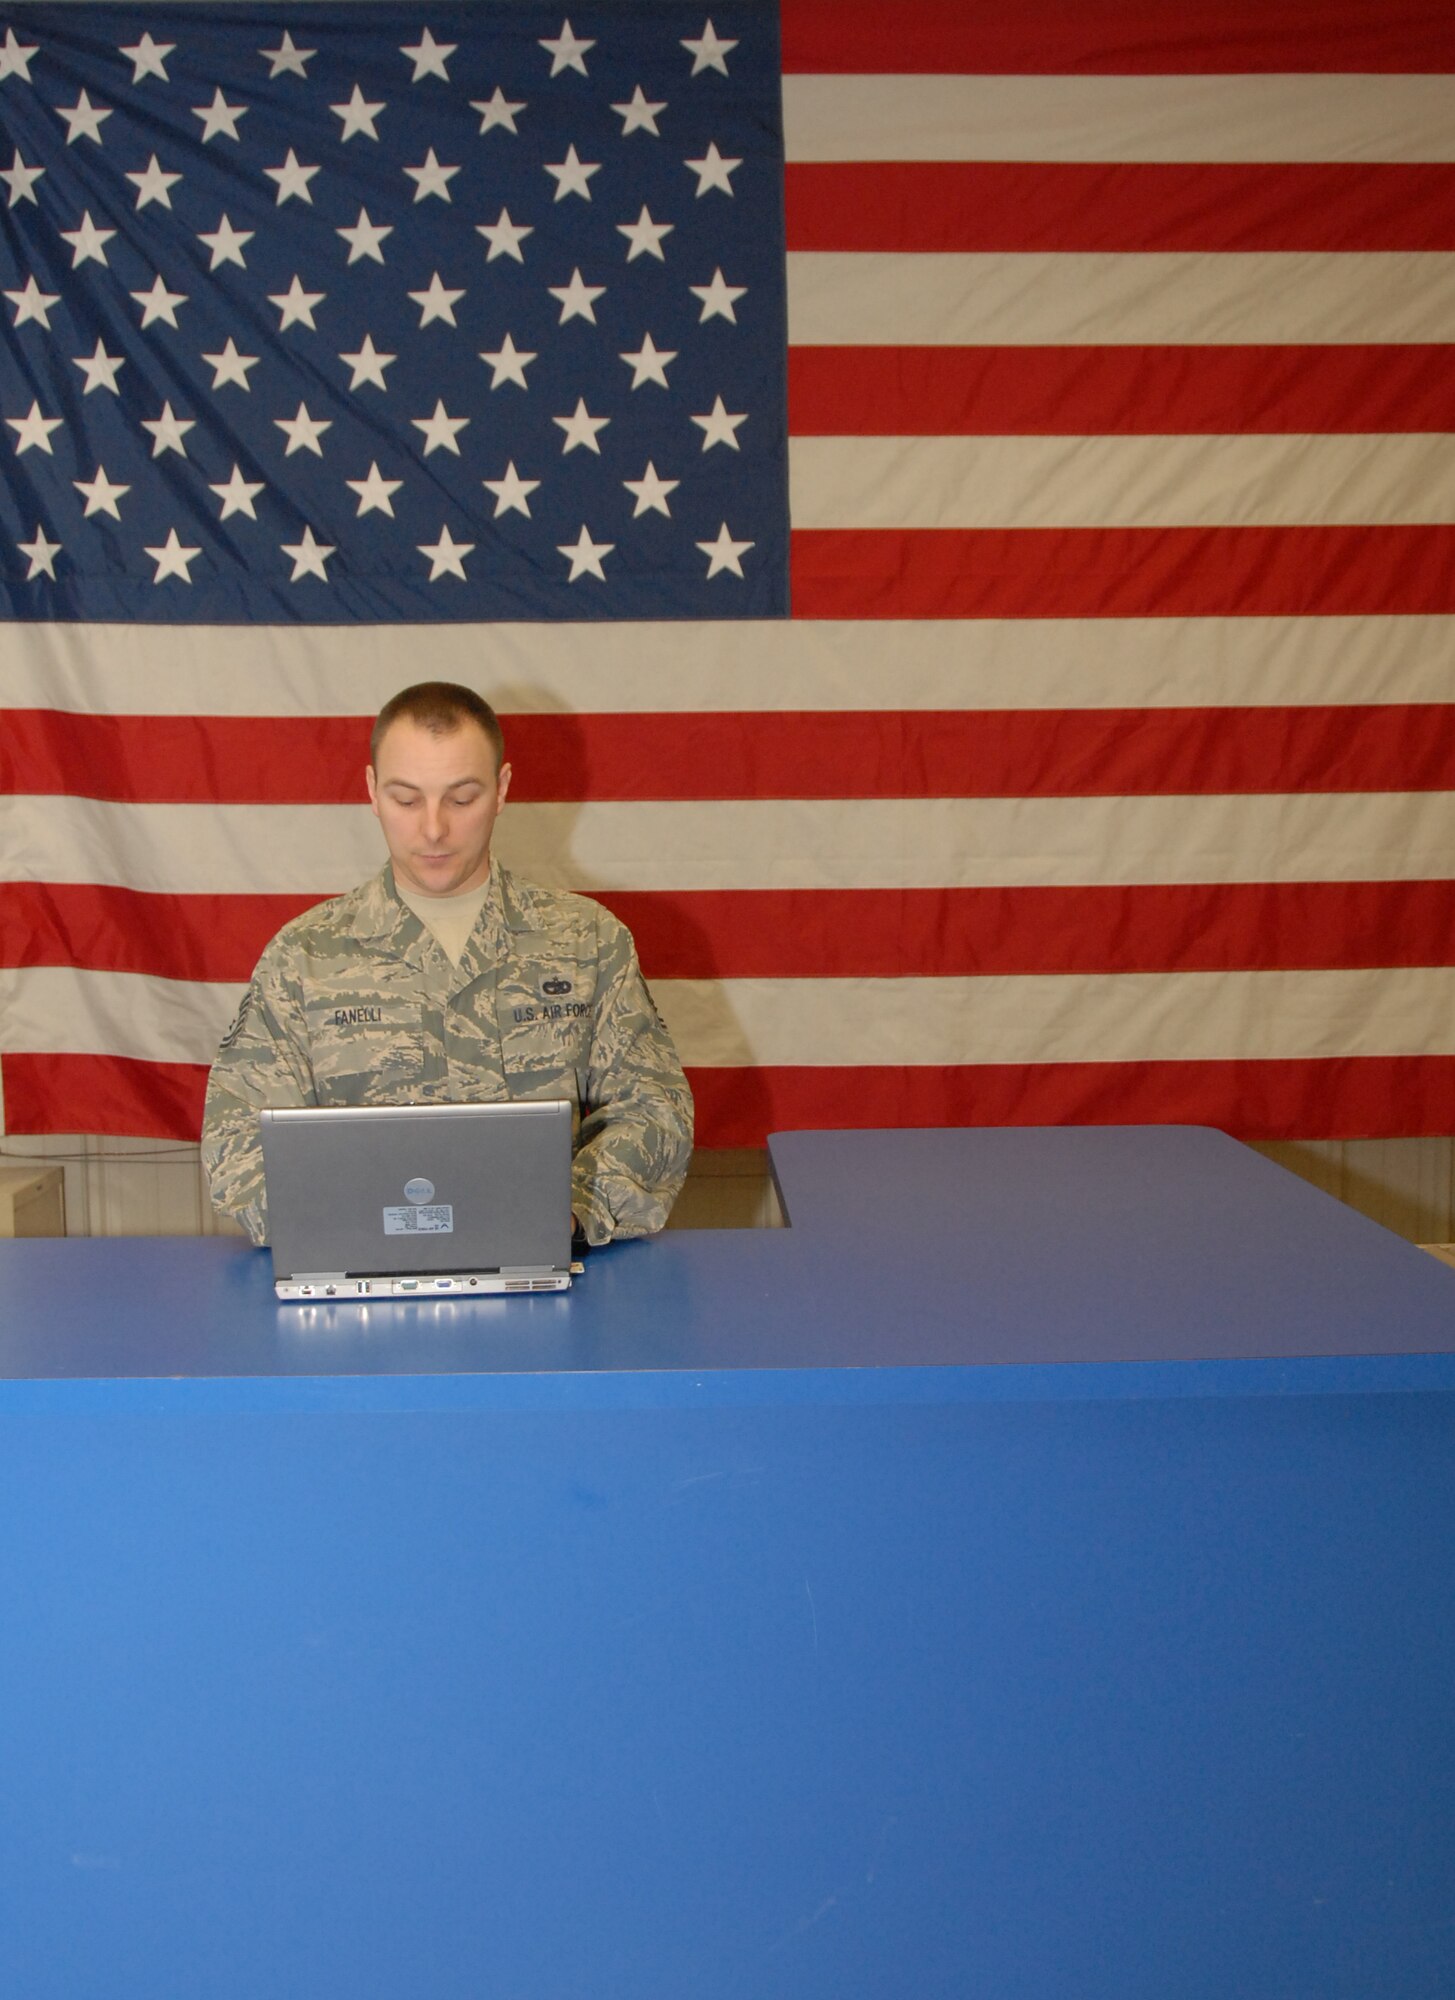 Tech Sgt. Christopher D. Fanelli, air transportation craftsman, 103rd Logistics Readiness Squadron, stands ready at the customer service counter at the Bradley Air National Guard Base, East Granby, Conn. Feb. 25, 2009.   (U.S. Air Force Photo by Capt. Bryon M. Turner)
